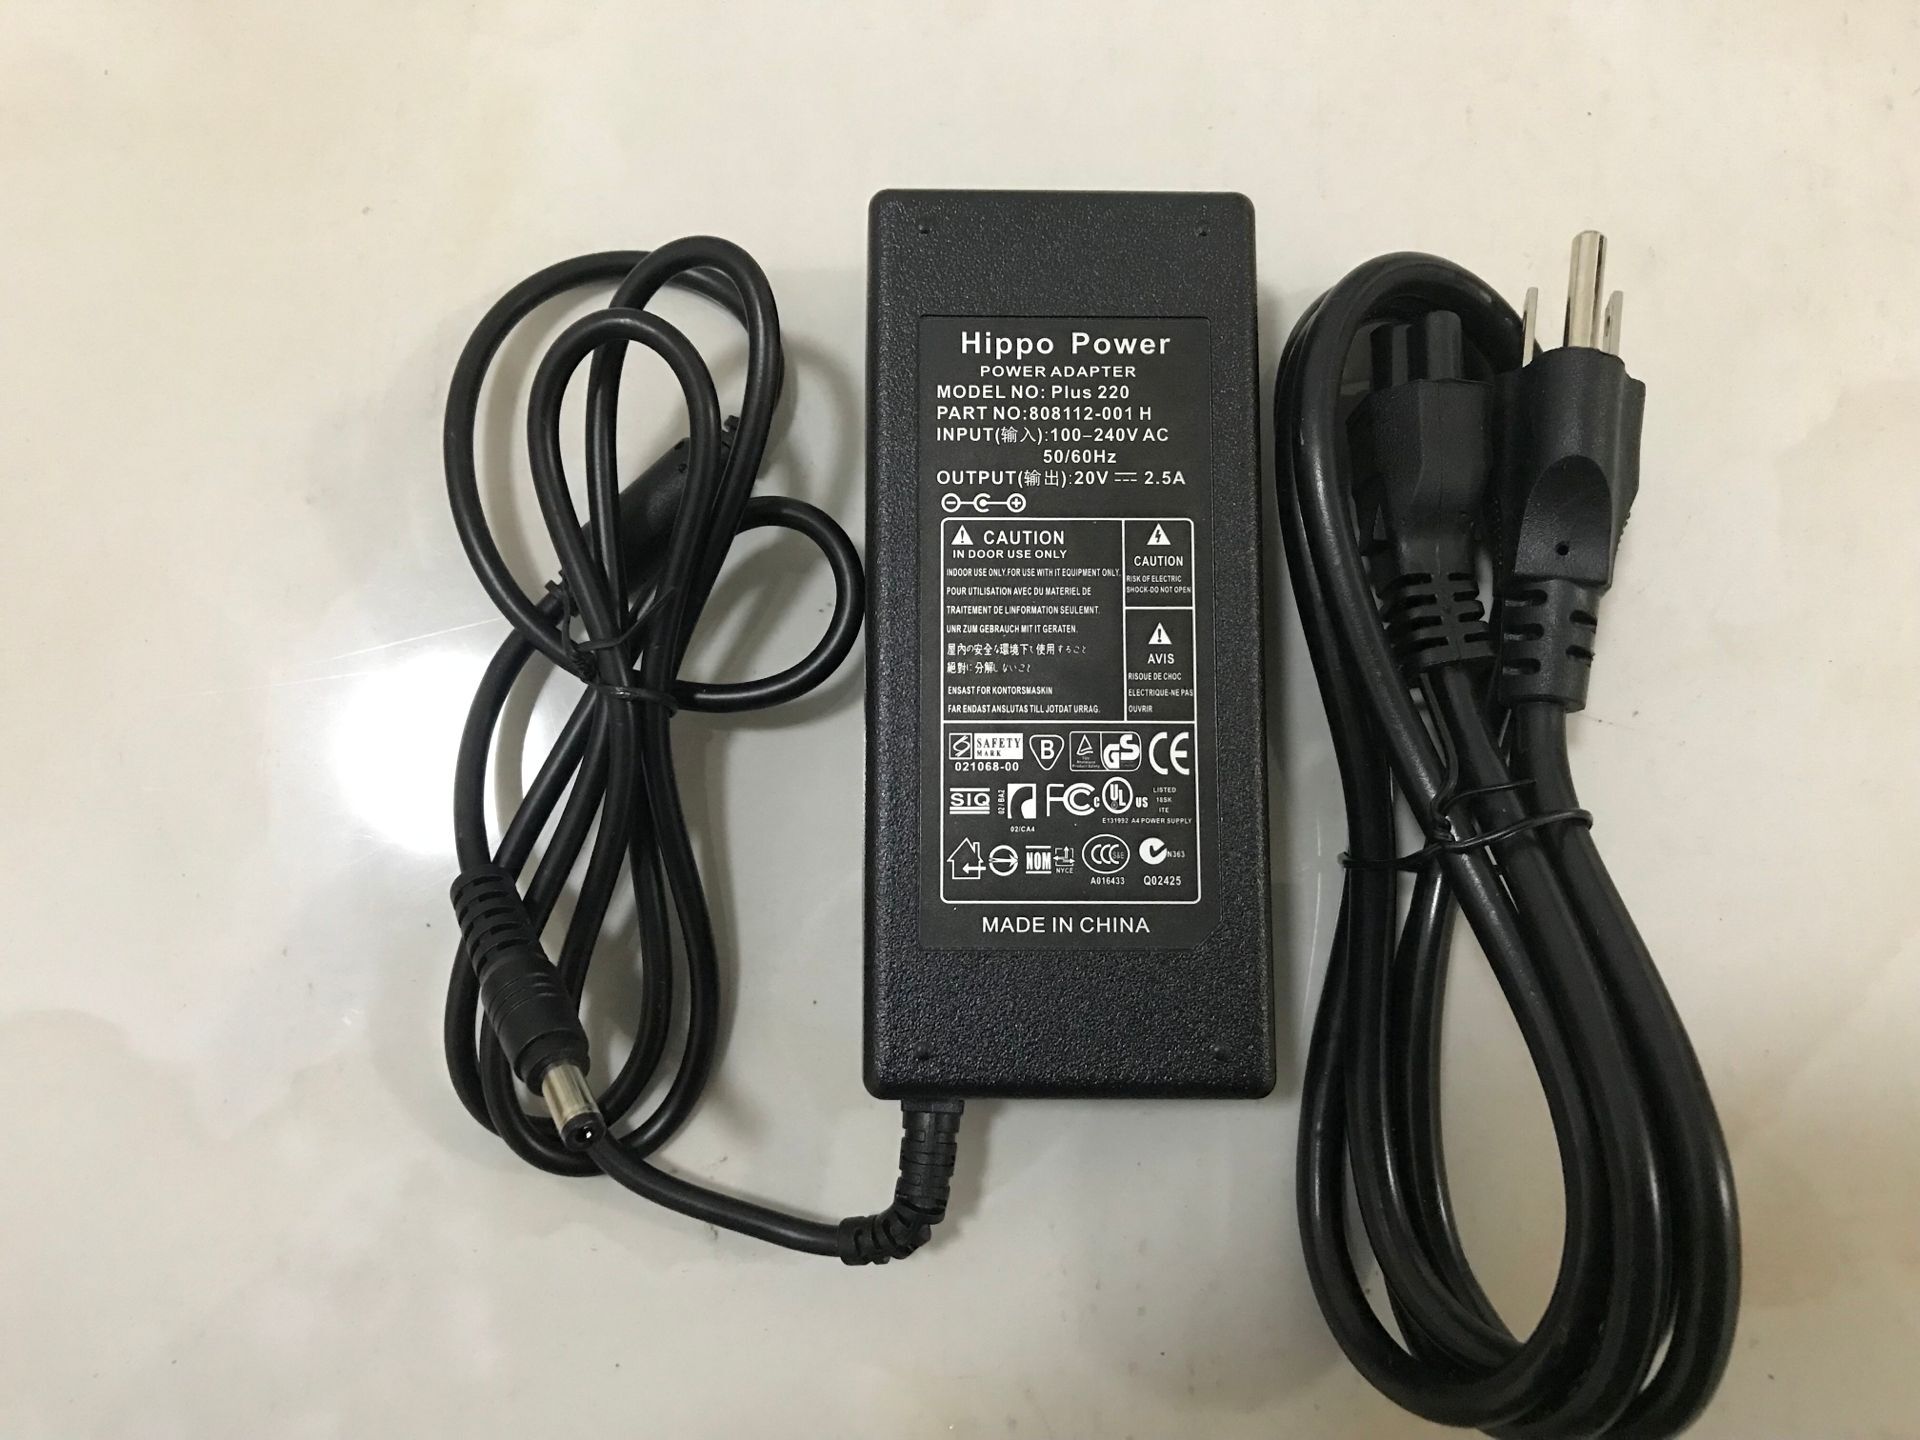 NEW POWER ADAPTER PLUS 220 808112-001 H 20V 2.5A AC ADAPTER